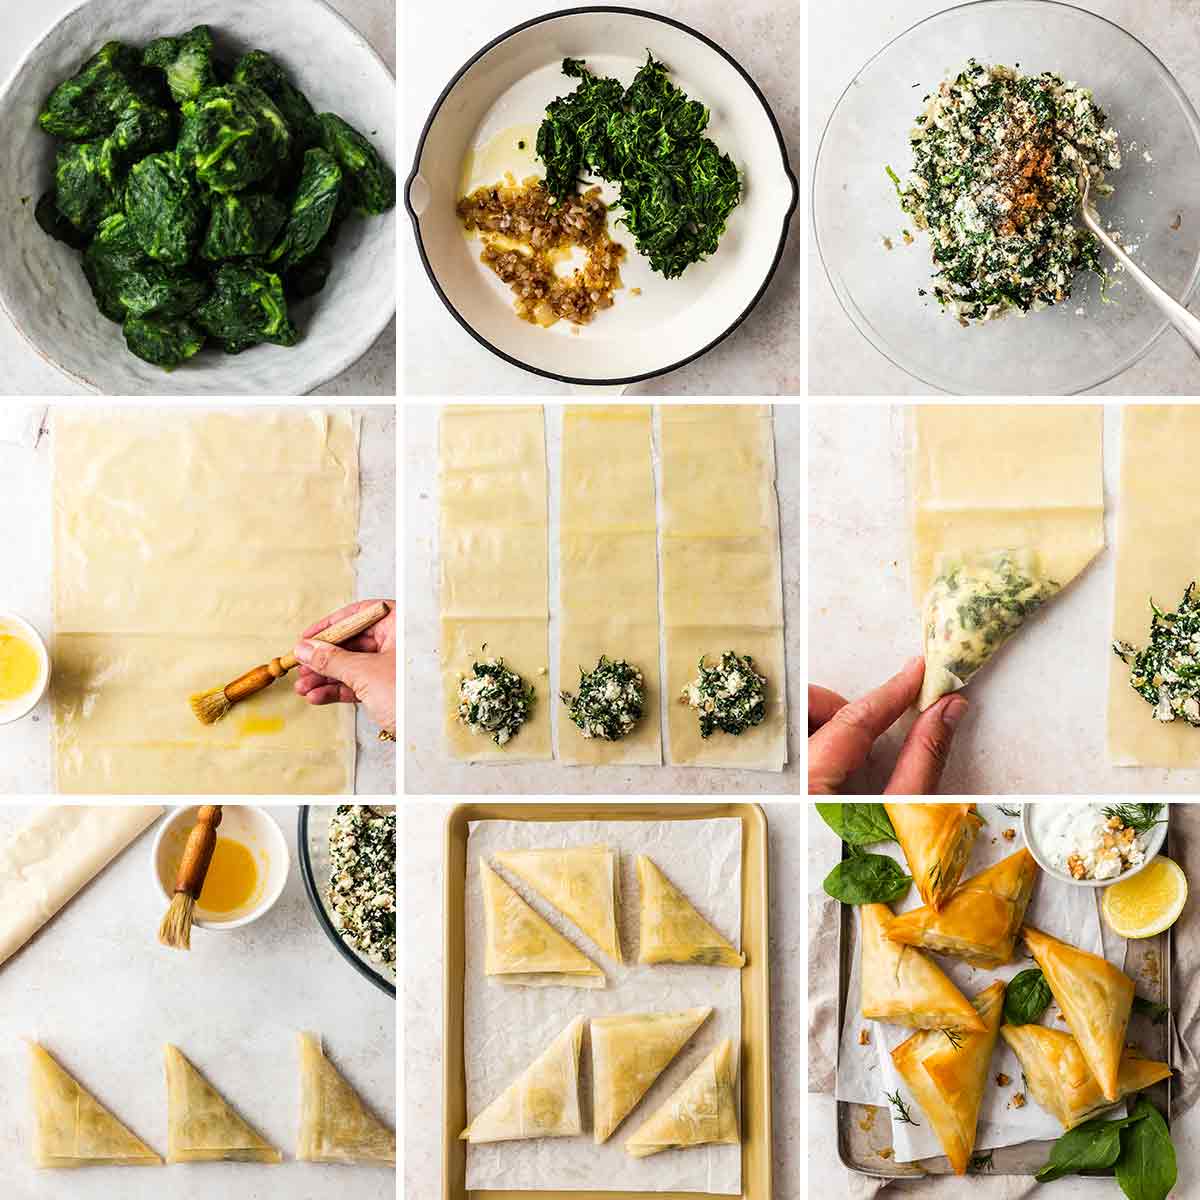 How to Make and Fold Spanakopita Spinach Feta Triangles